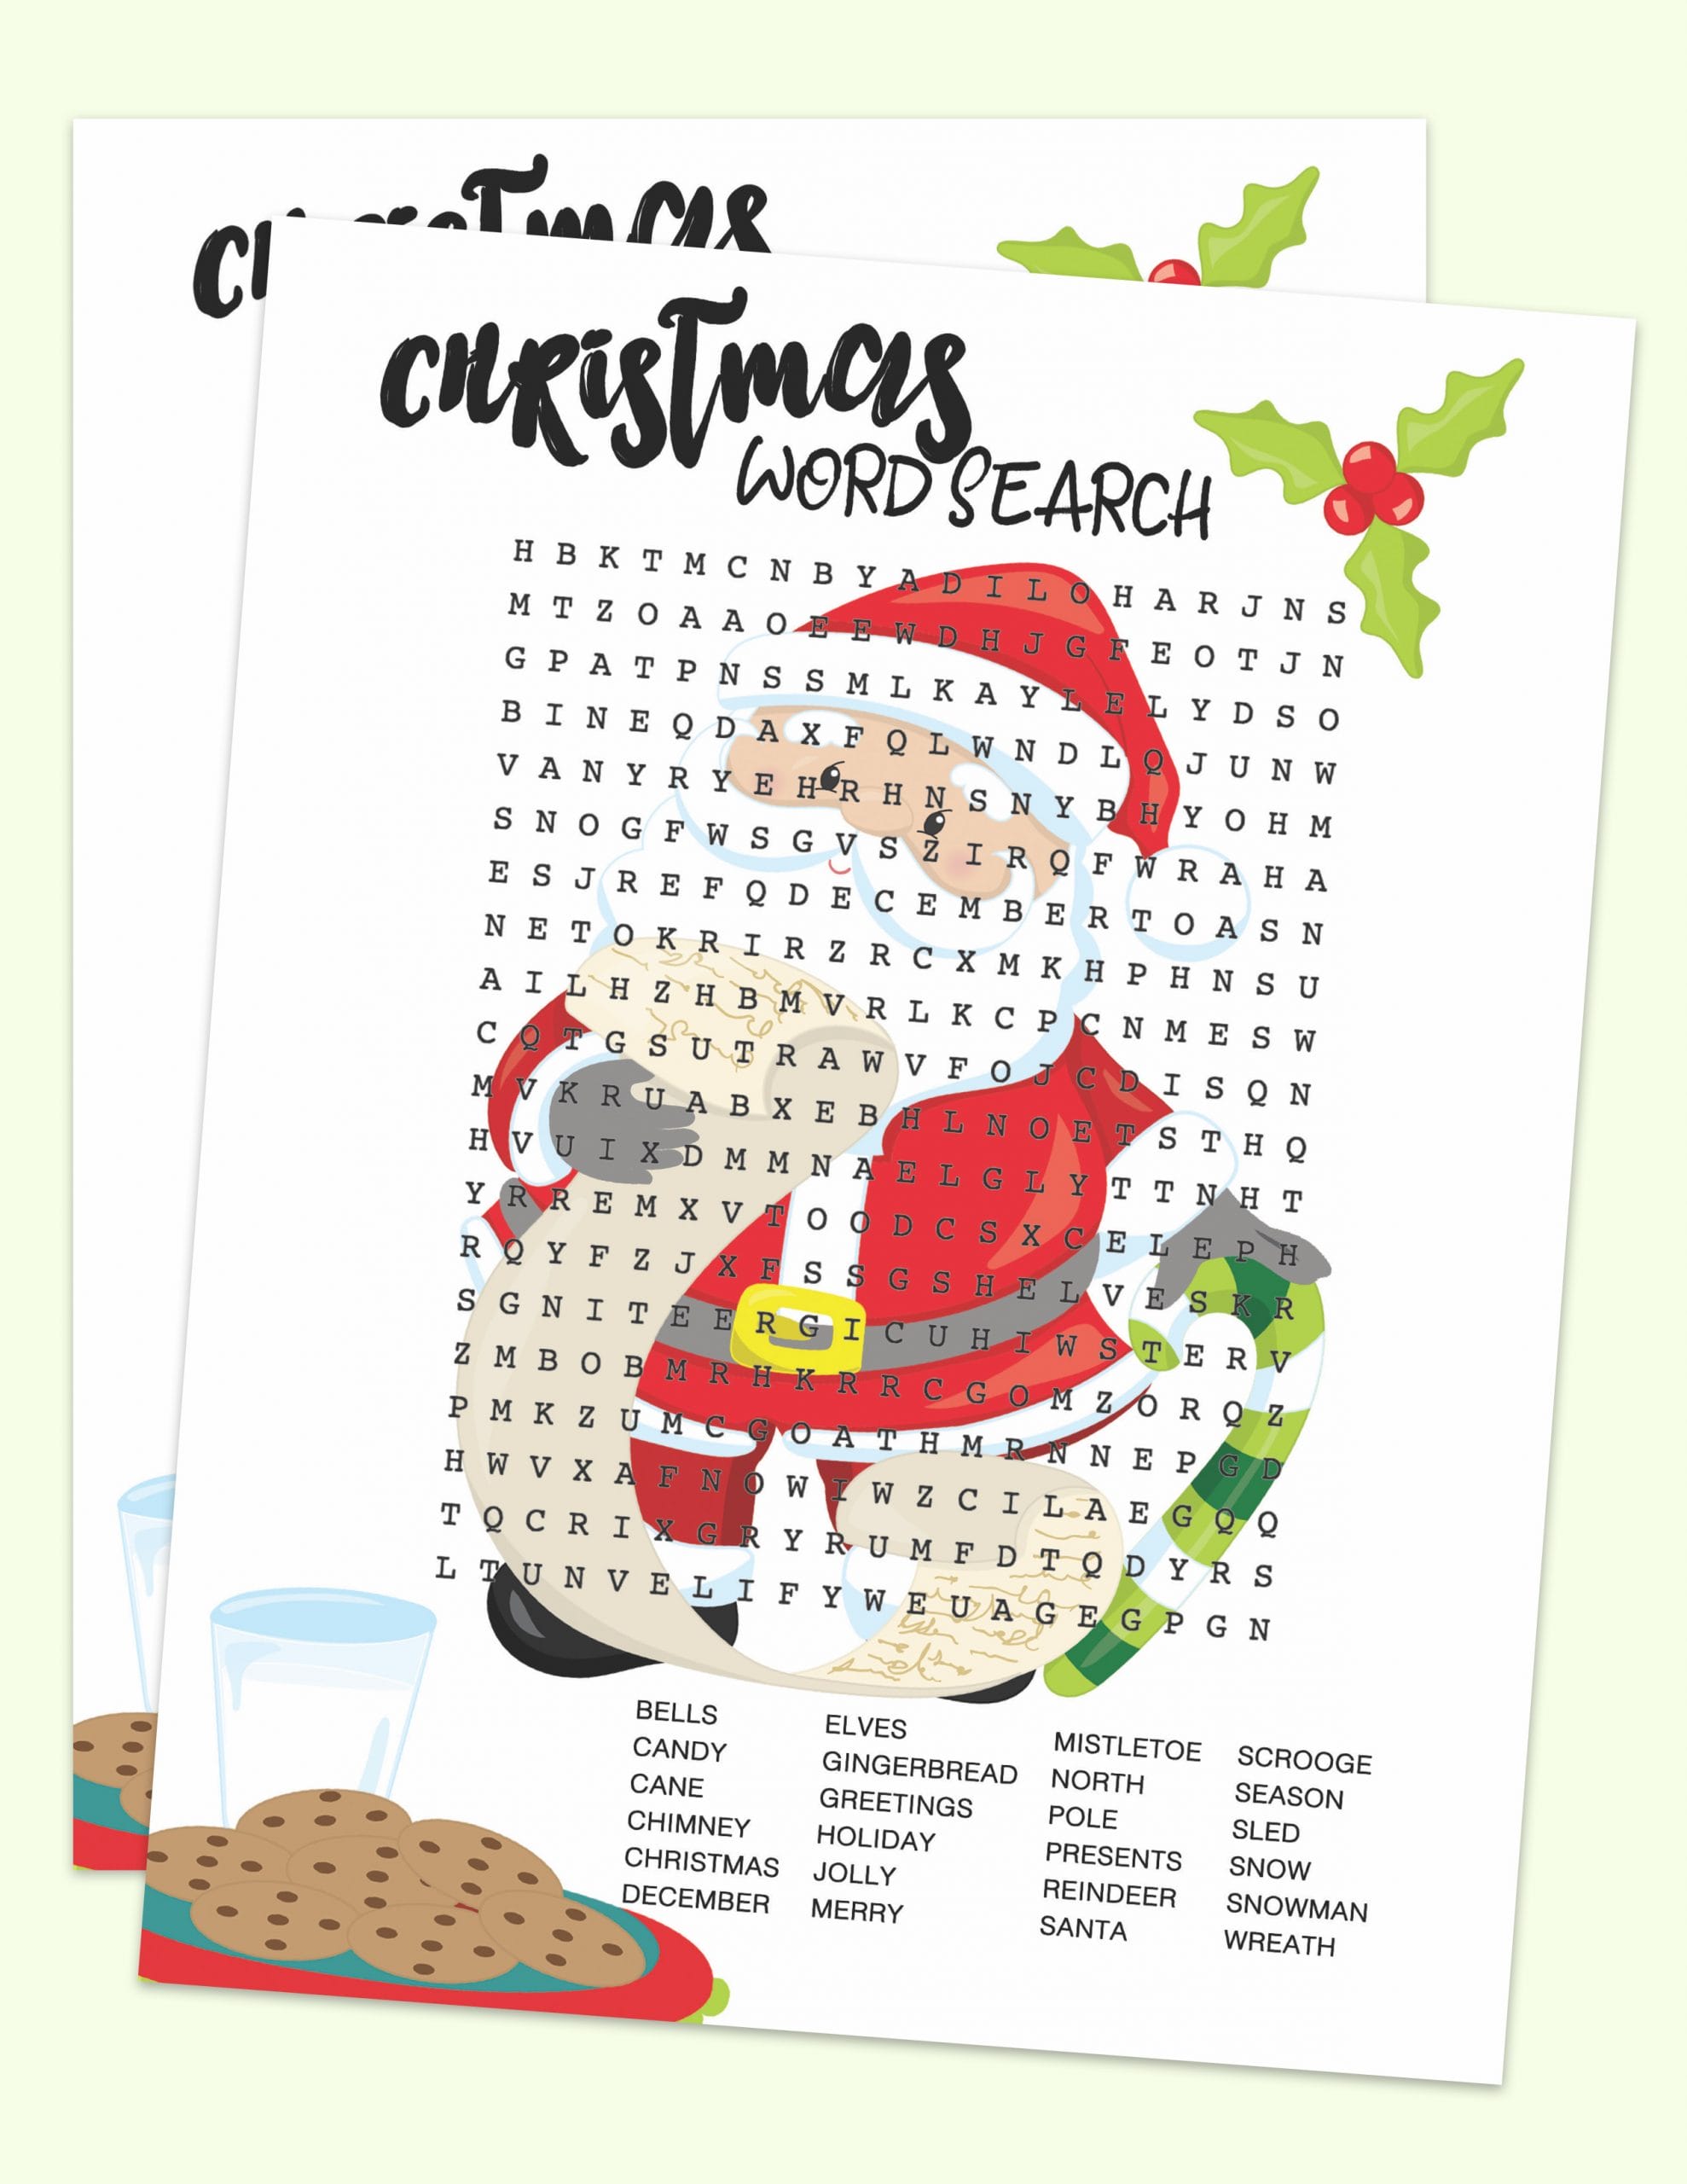 Looking for Christmas themed activities for your children ? Why not celebrate the Christmas season with this Santa Word Search. This free Christmas printable brings a little fun into your child's day and helps exercise their minds.